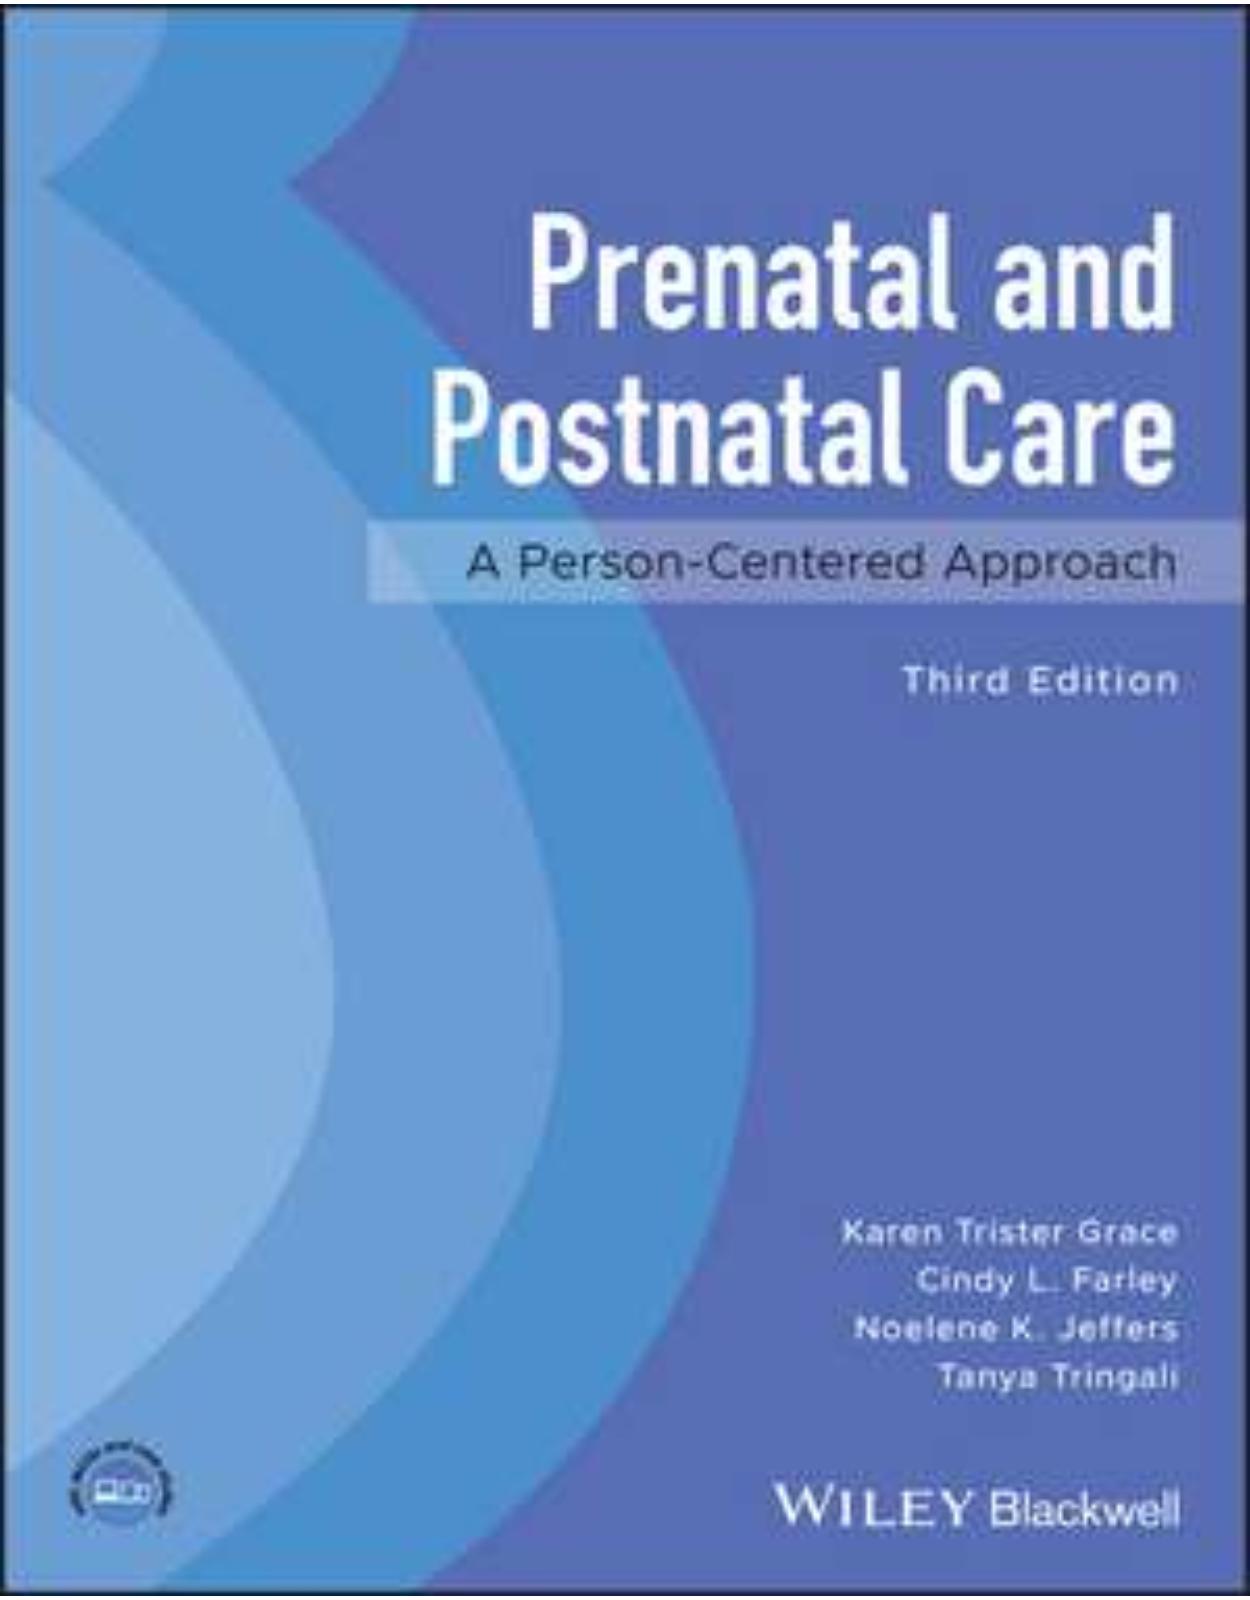 Prenatal and Postnatal Care: A Woman-Centered Approach, 2nd Edition